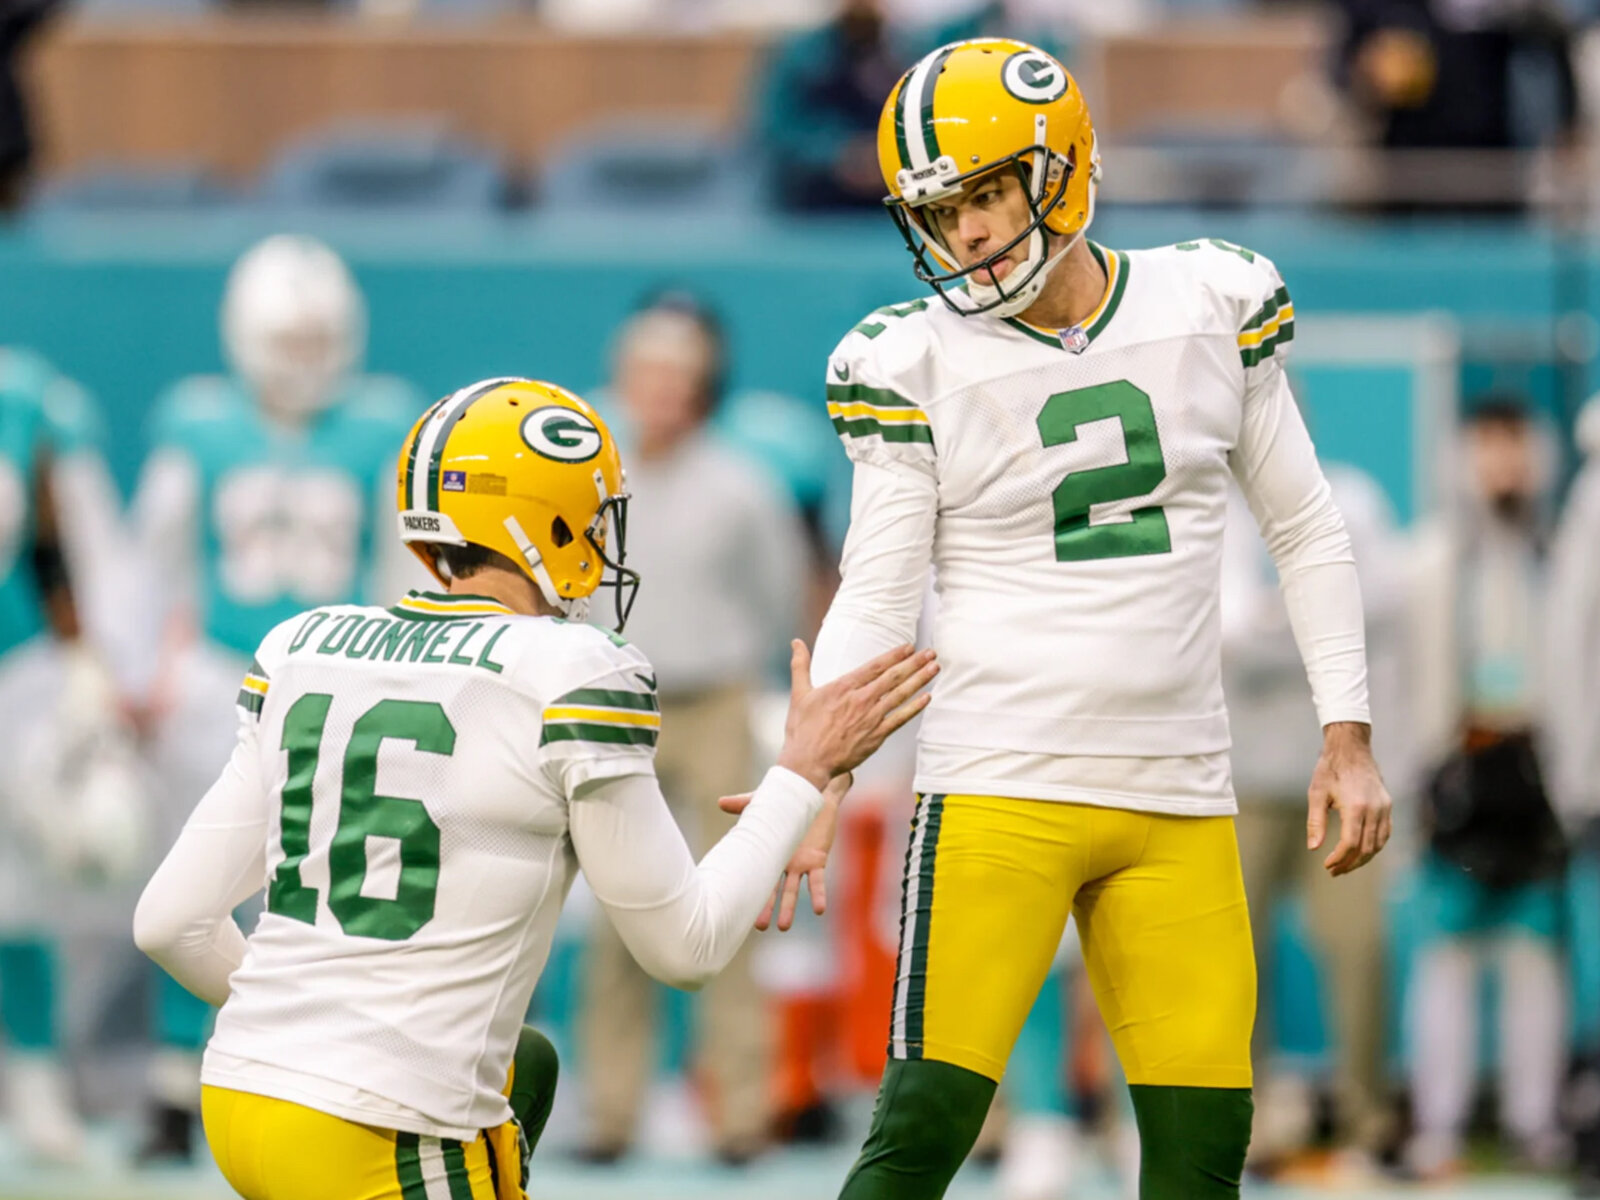 Game recap: 5 takeaways from Packers' Christmas victory over Dolphins